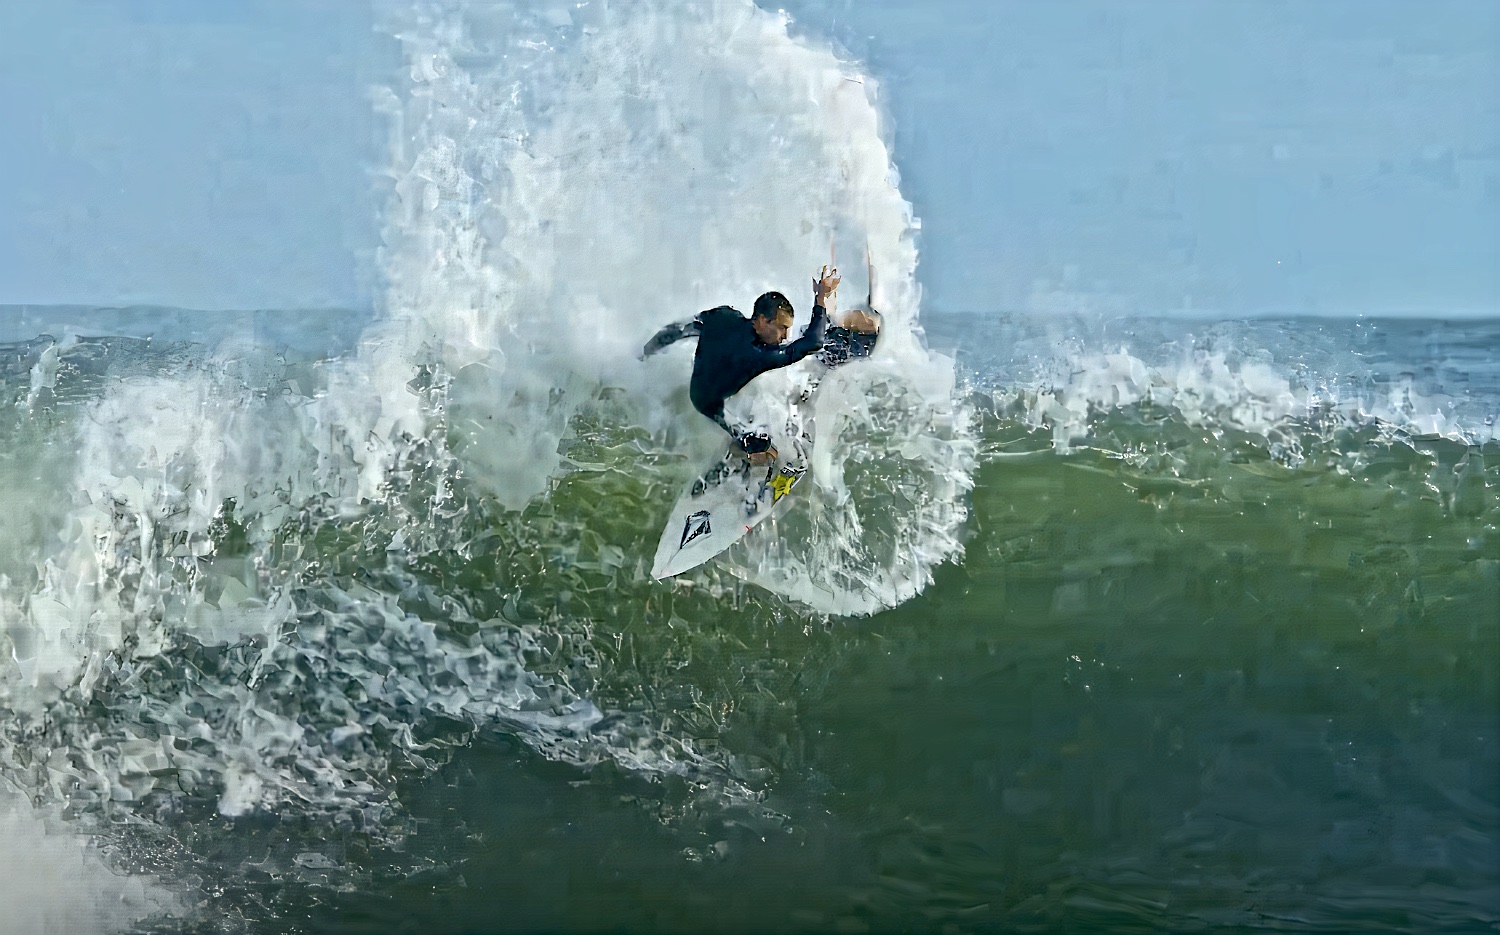 co-vids best four months of ec surfing on film ever